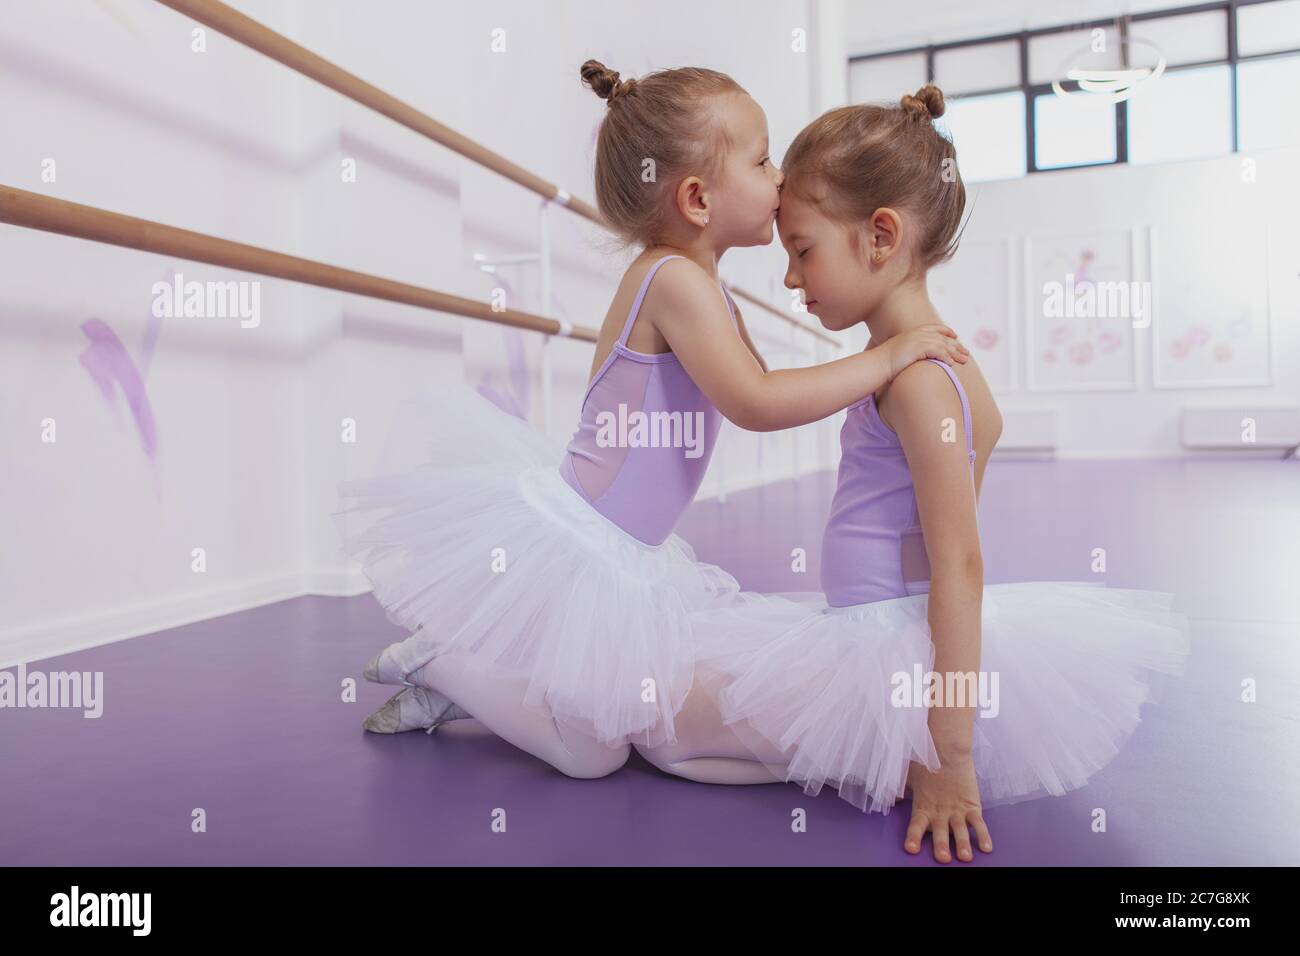 Indeholde sneen bestikke Children Two Little Girls Kissing High Resolution Stock Photography and  Images - Alamy